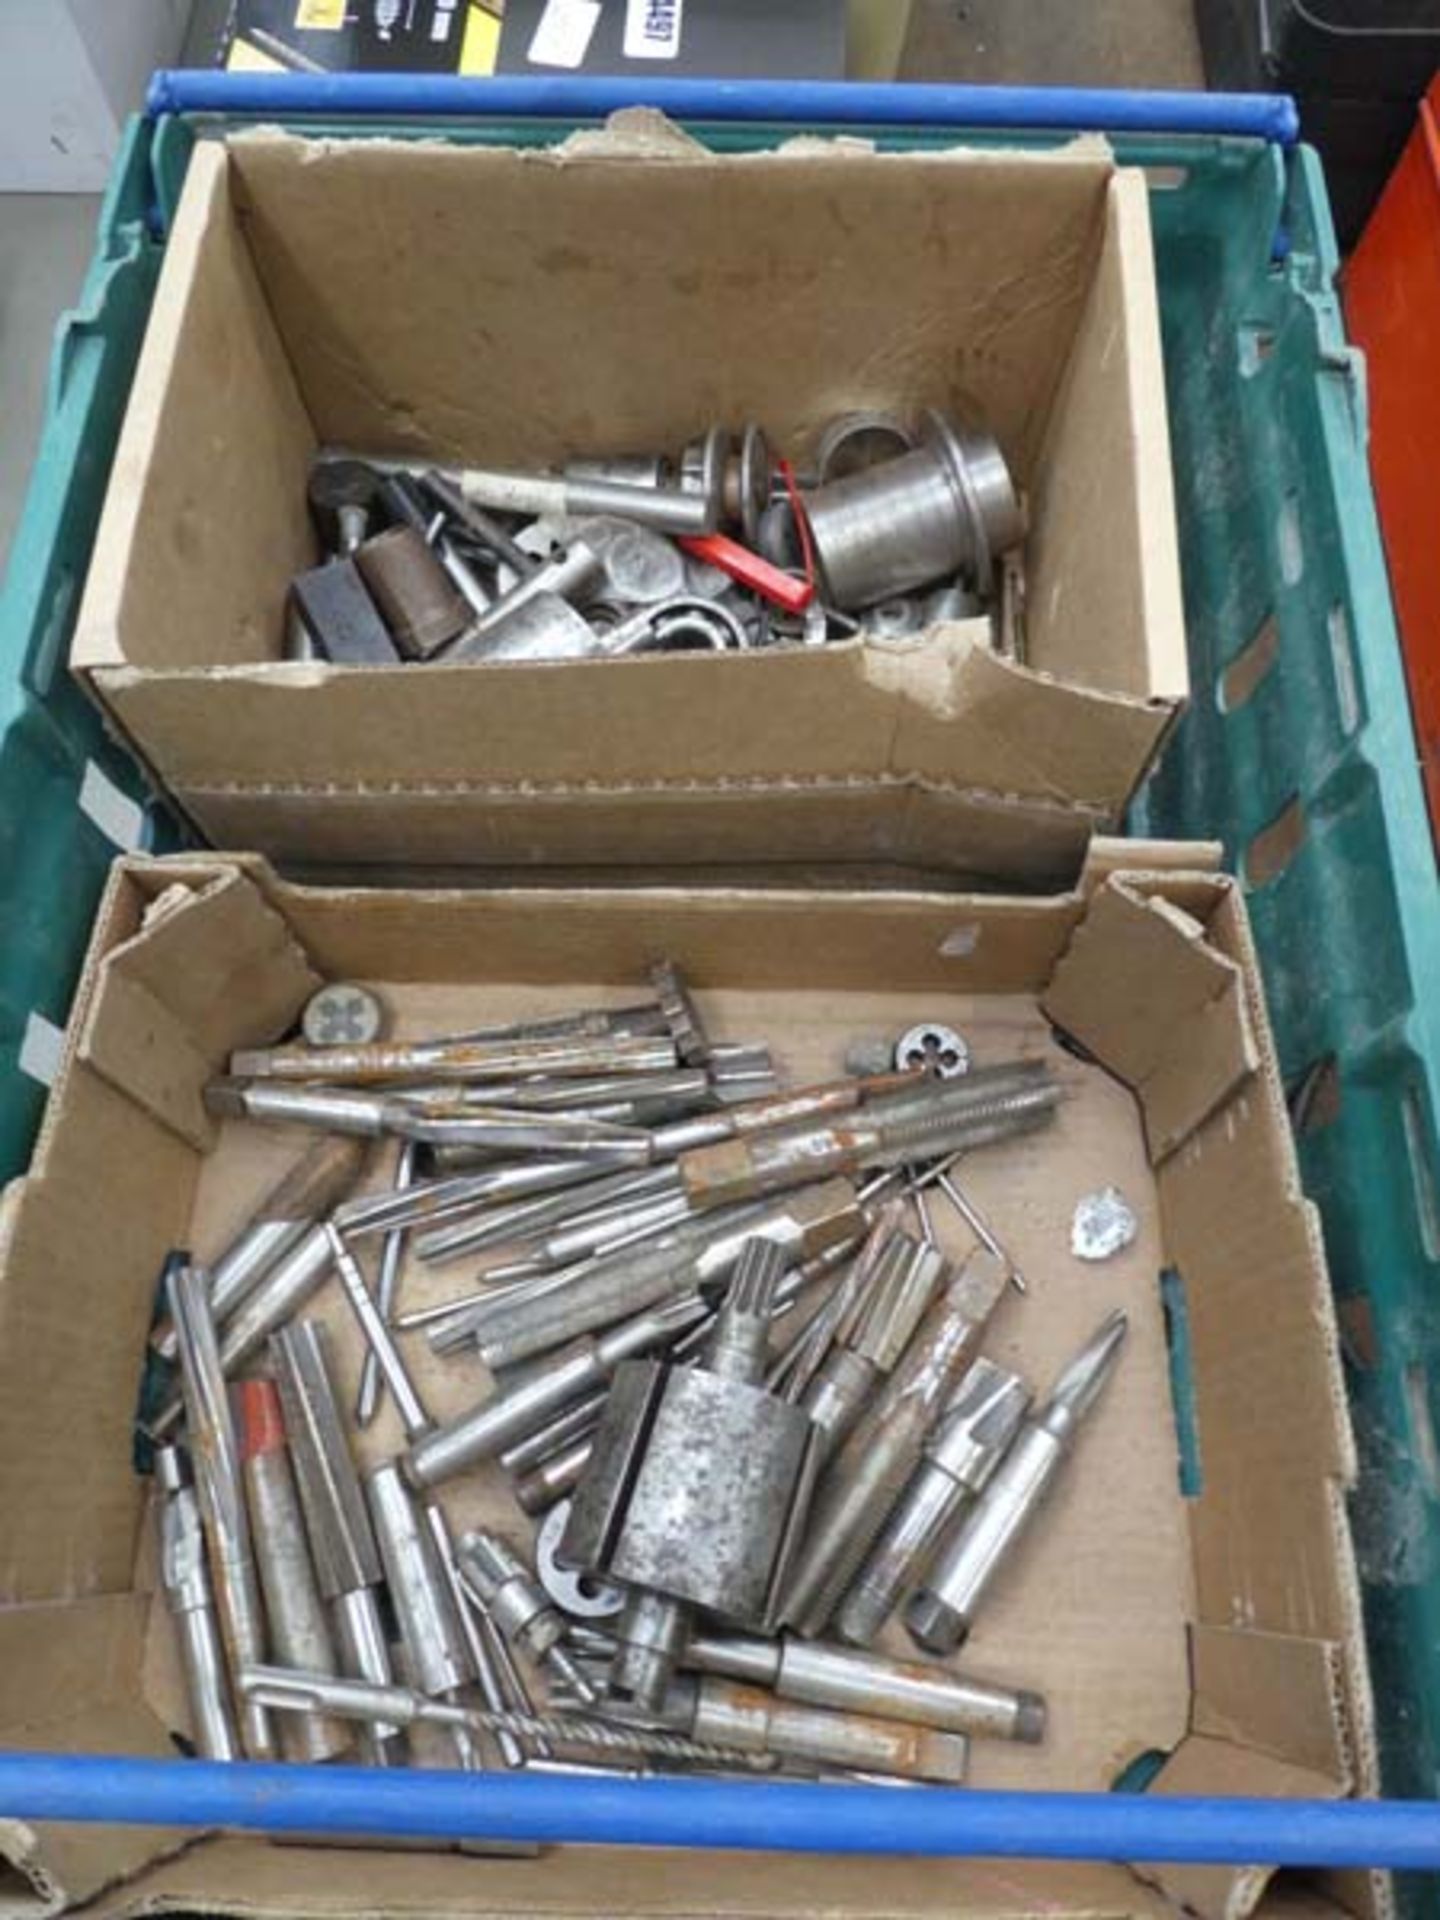 Plastic box of reamers, taps and other machine parts